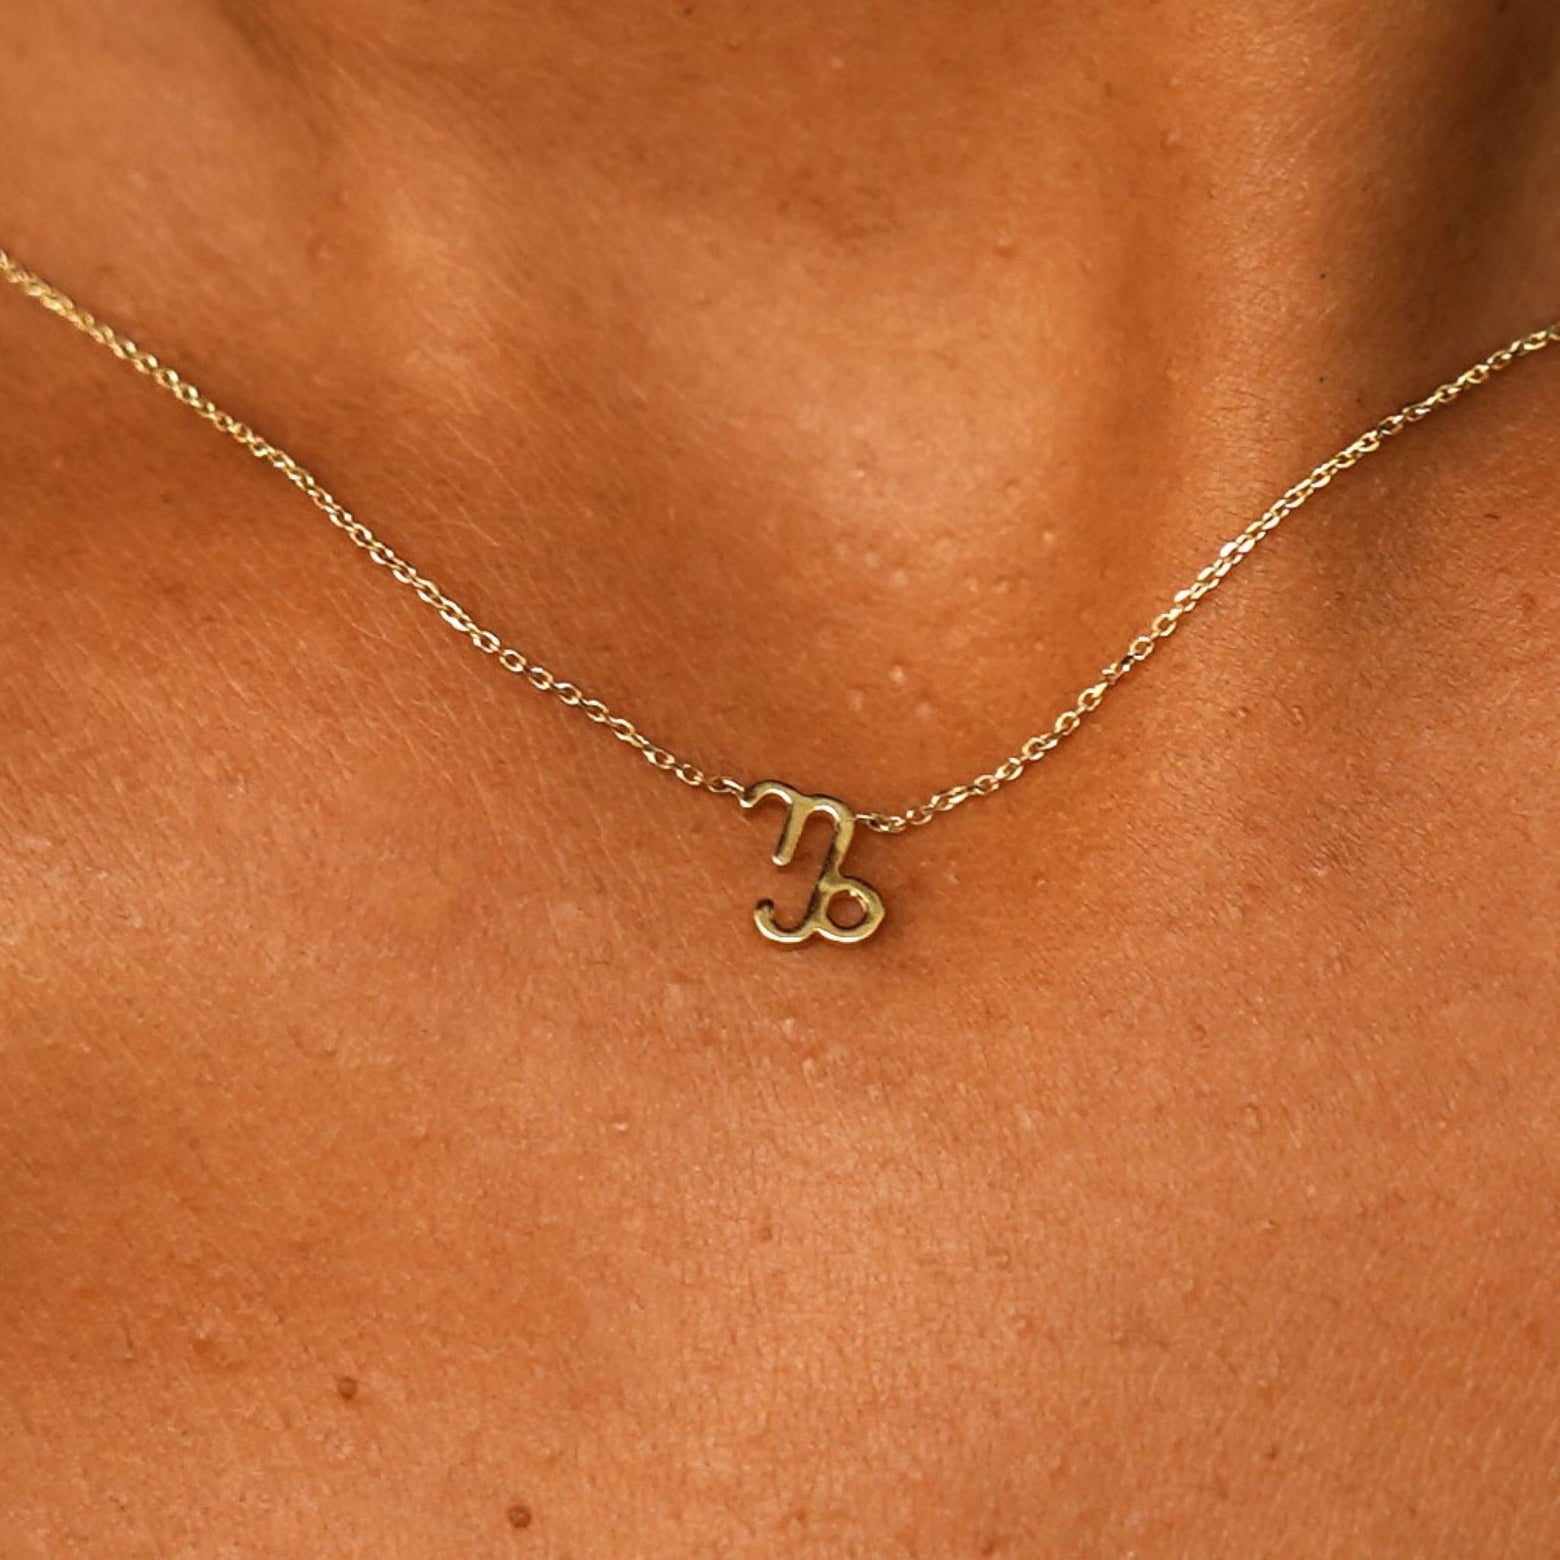 Close up view of a model's neck wearing a solid 14k yellow gold Capricorn Horoscope Necklace